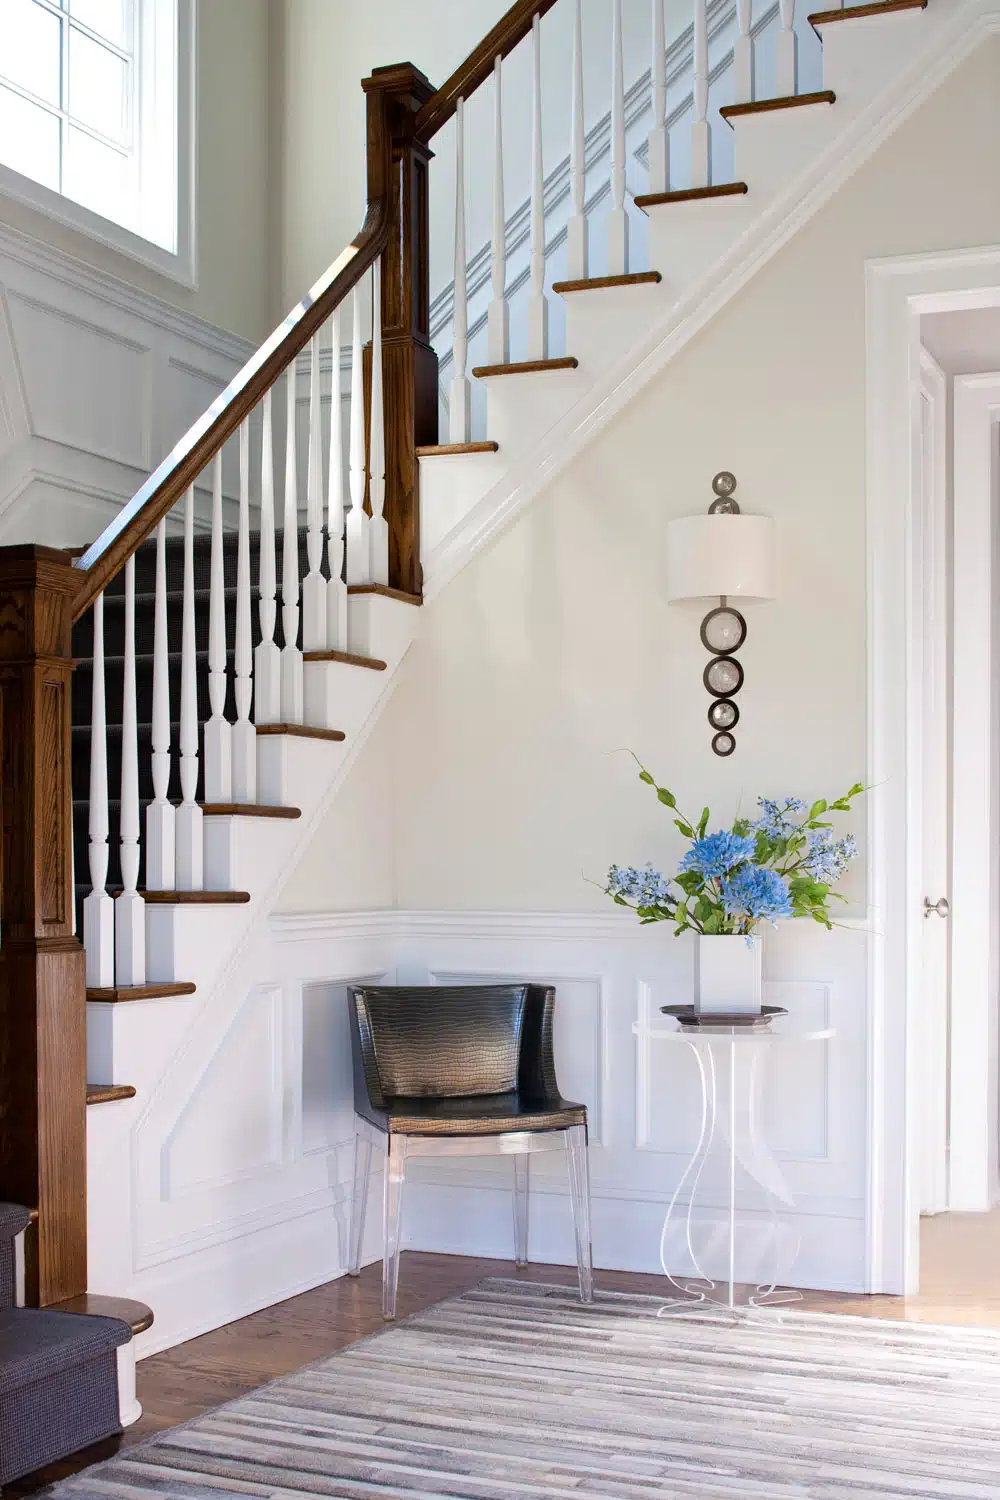 Elegant staircase with chair and decorative vase in hallway.